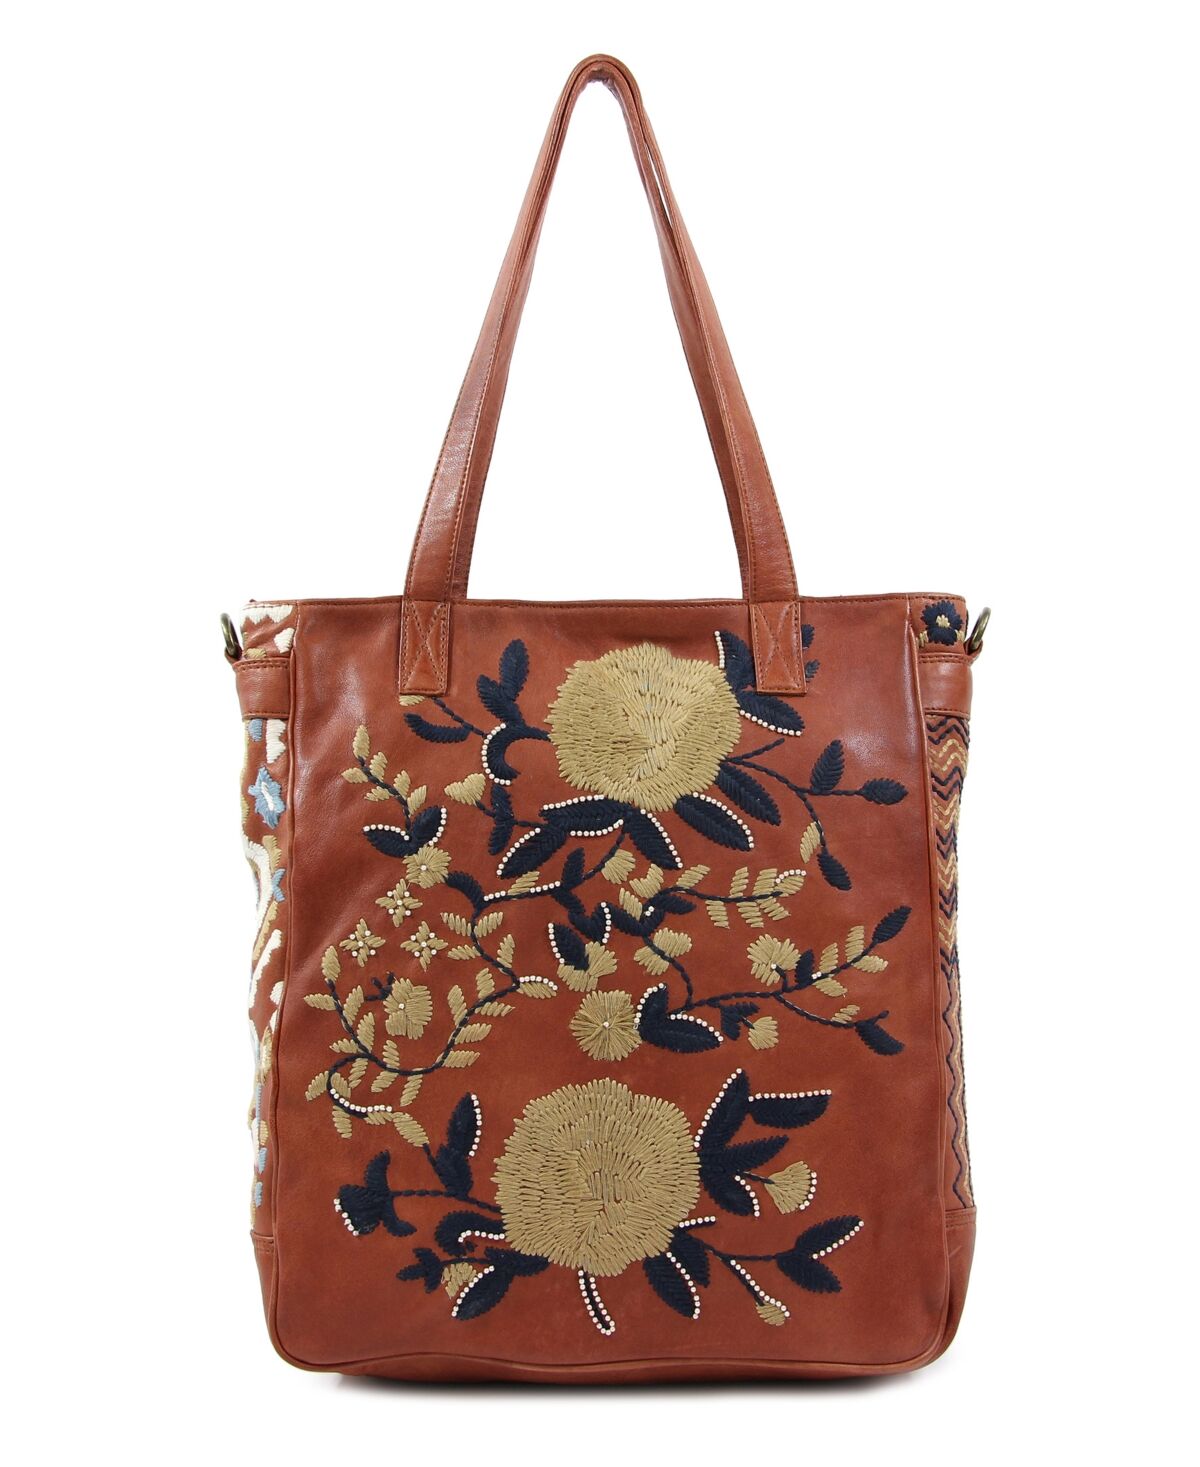 Old Trend Women's Flora Soul Hand-Embroidery Tote Bag - Cognac